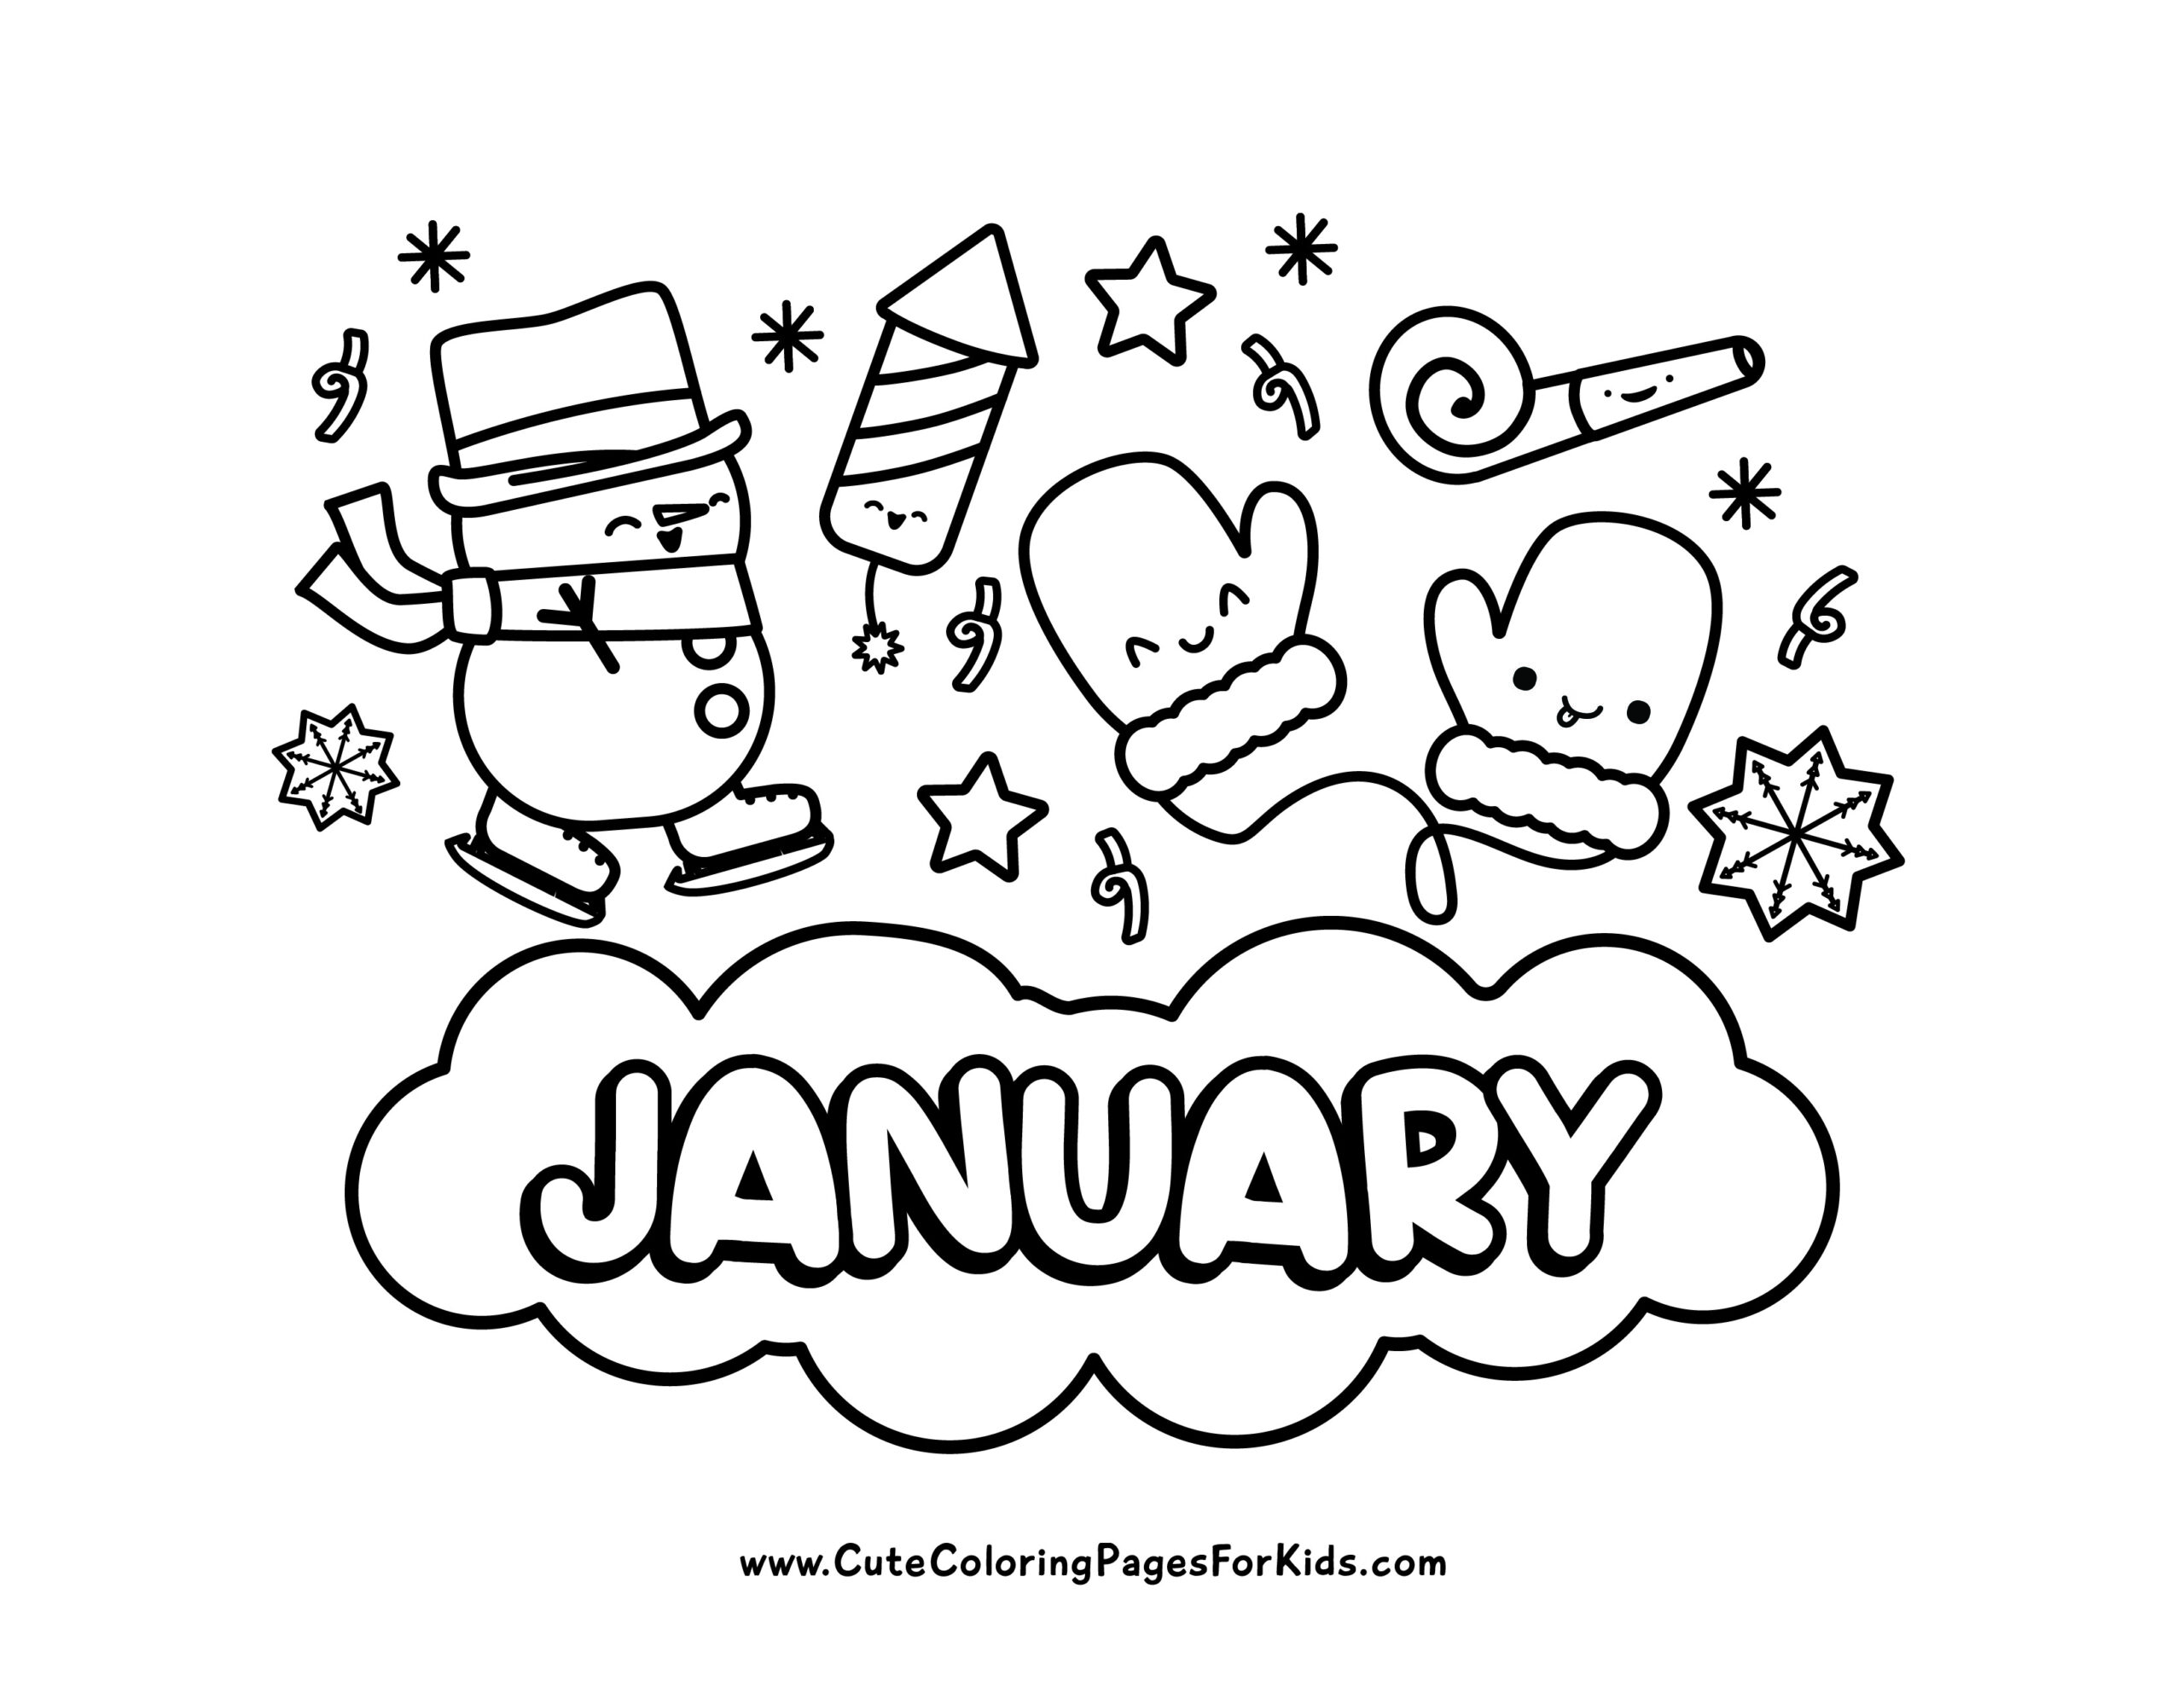 January Coloring Pages Cute Coloring Pages For Kids